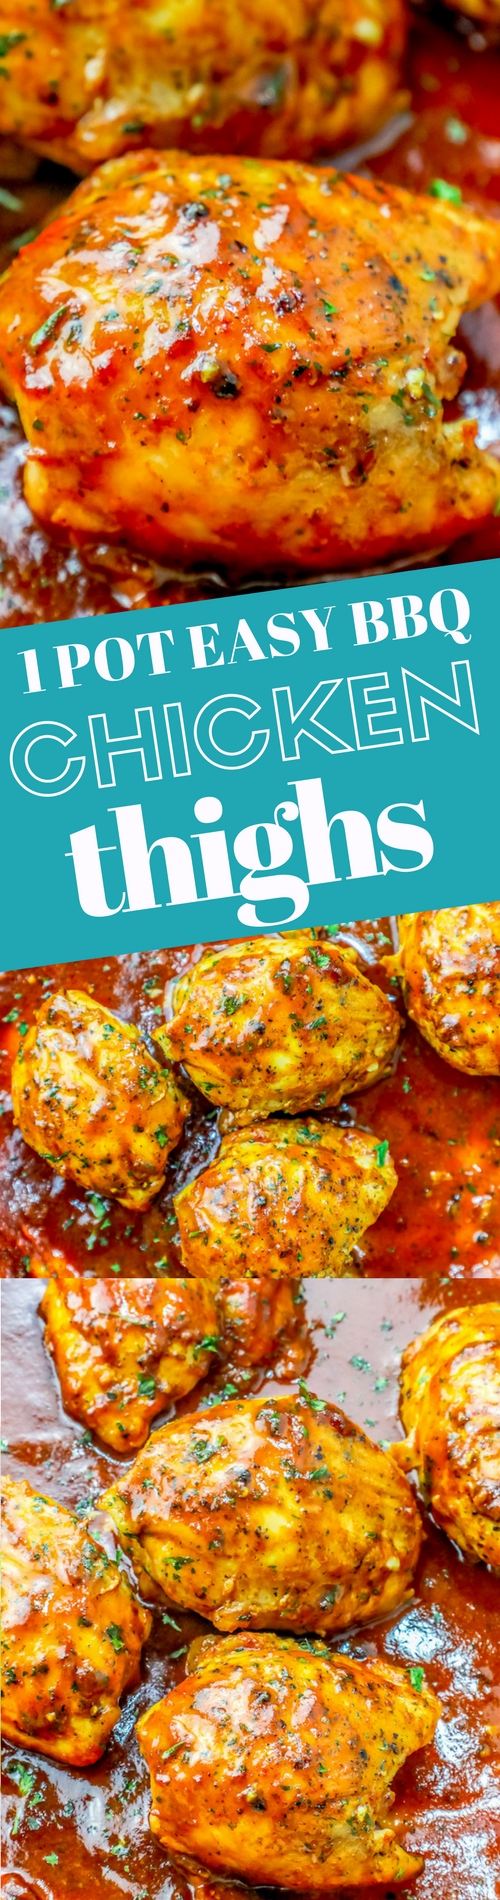 chicken thighs in a thick sauce with parsley